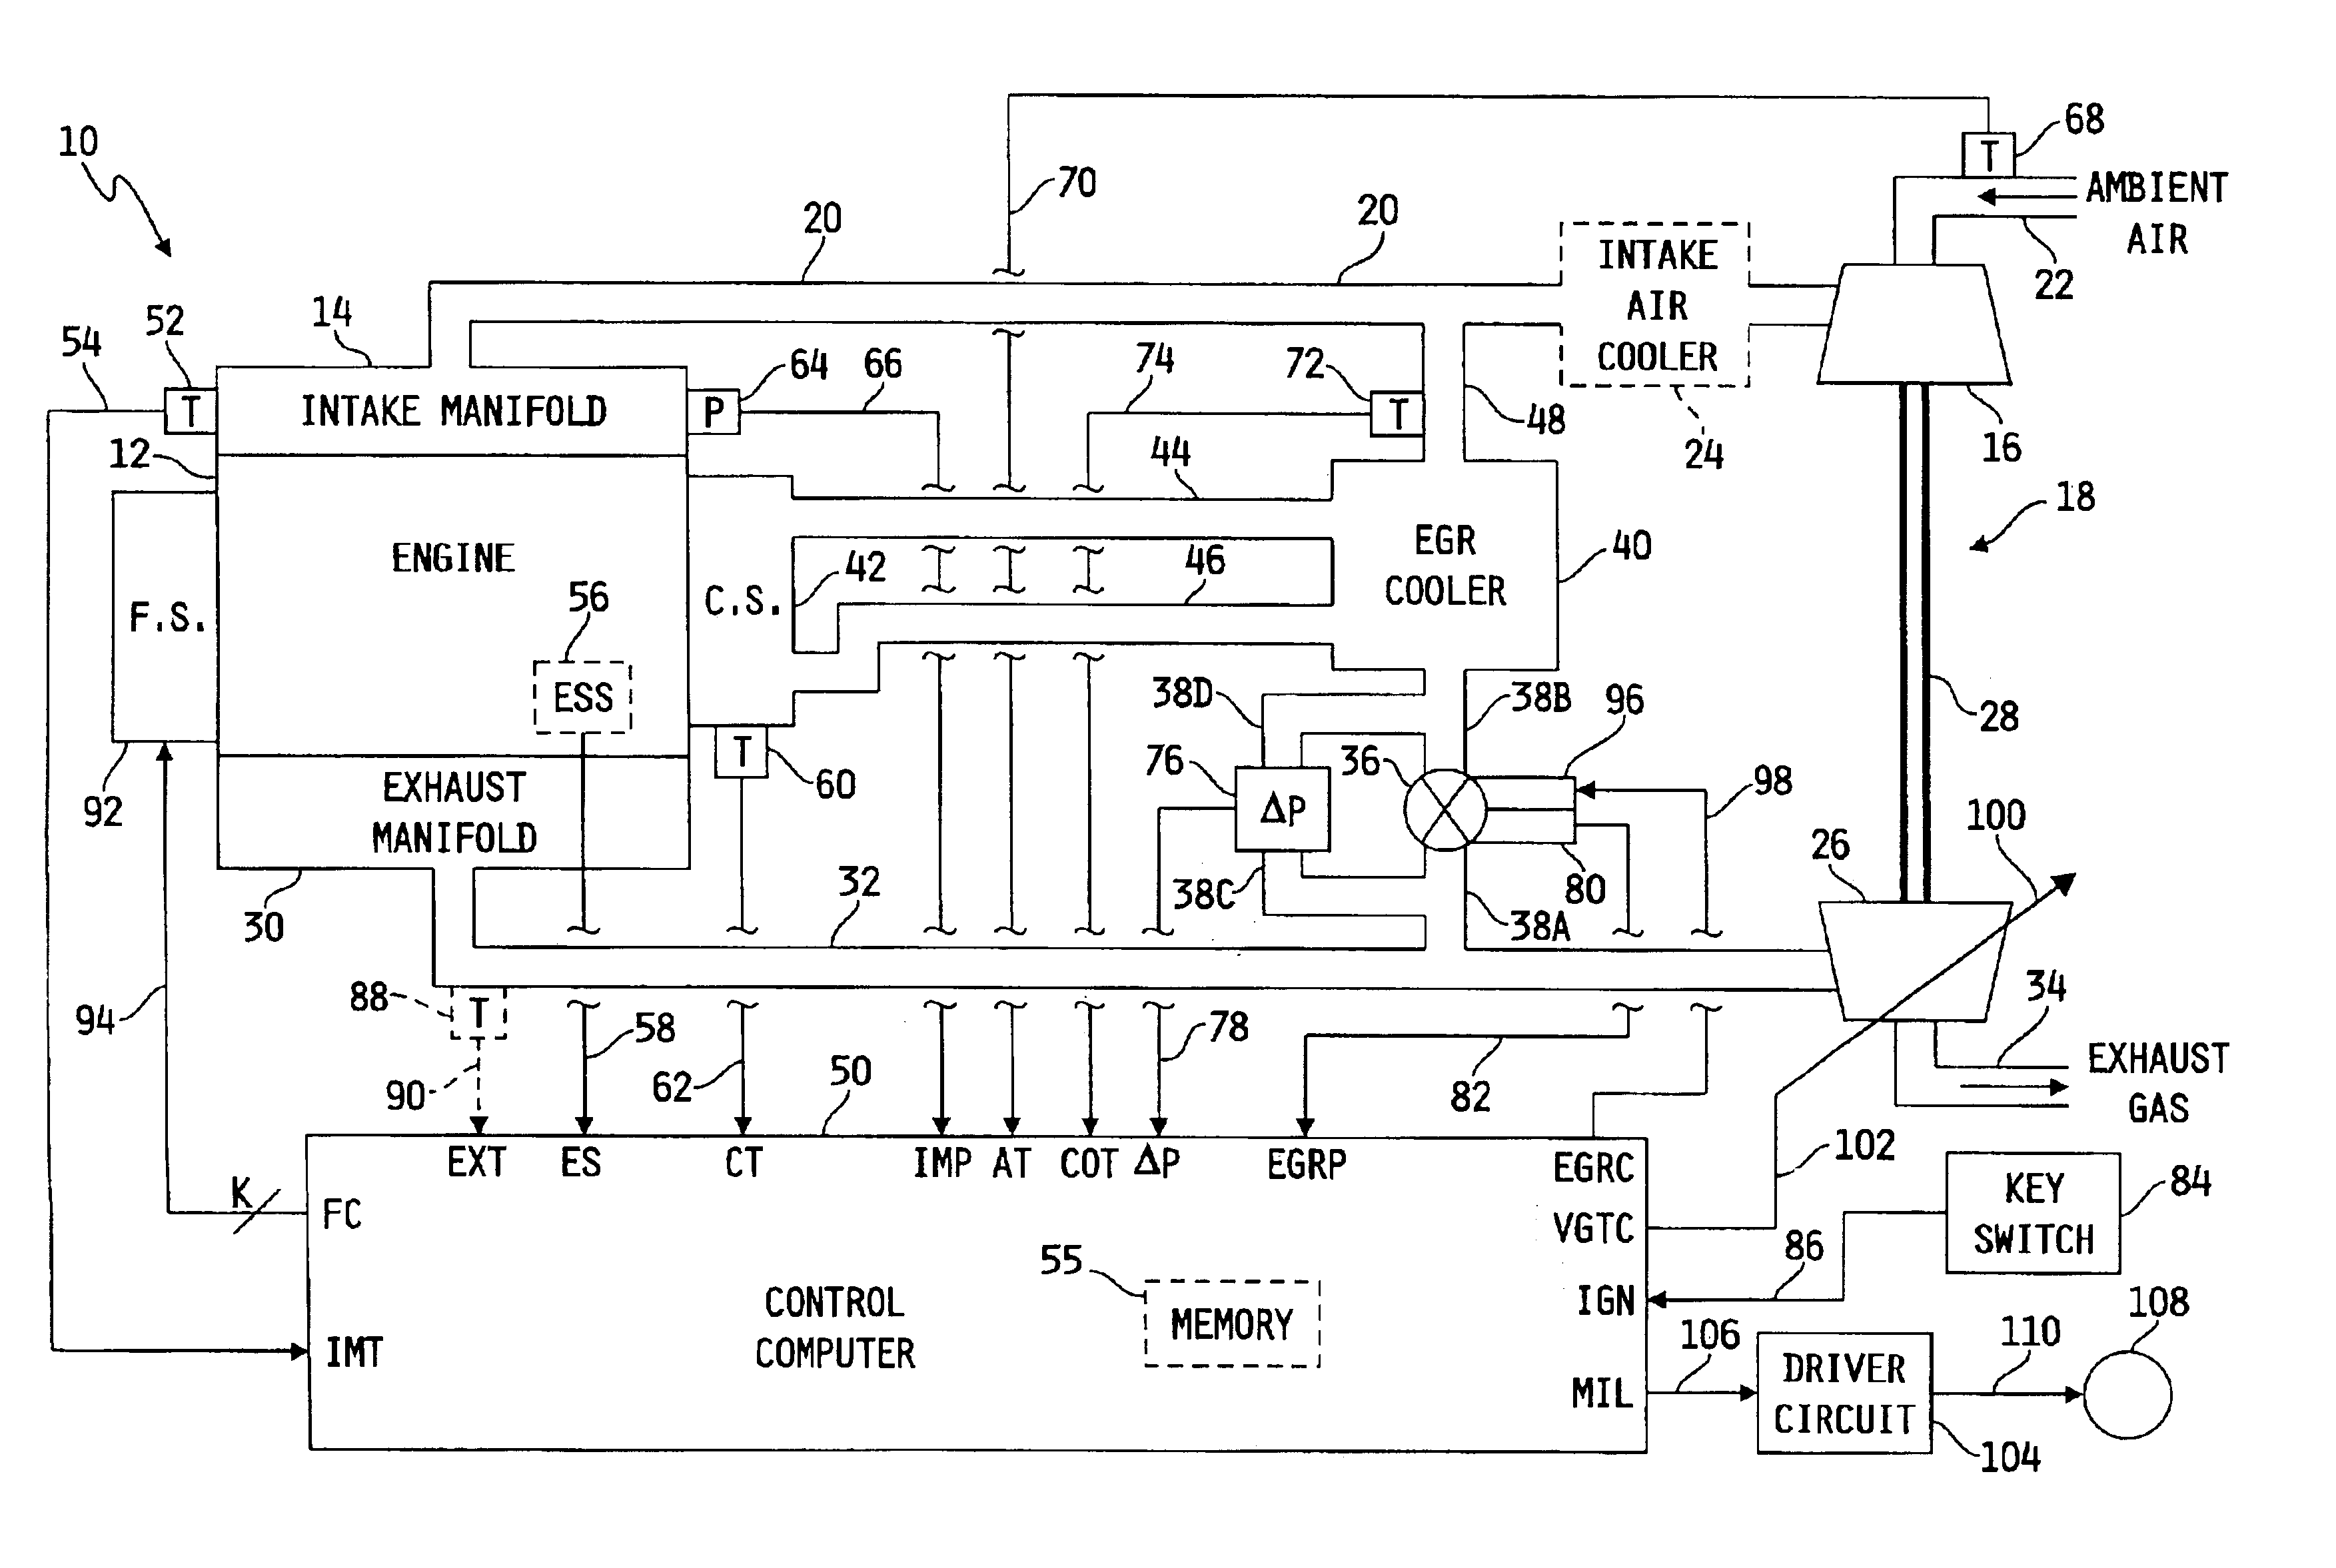 System for diagnosing operation of an EGR cooler